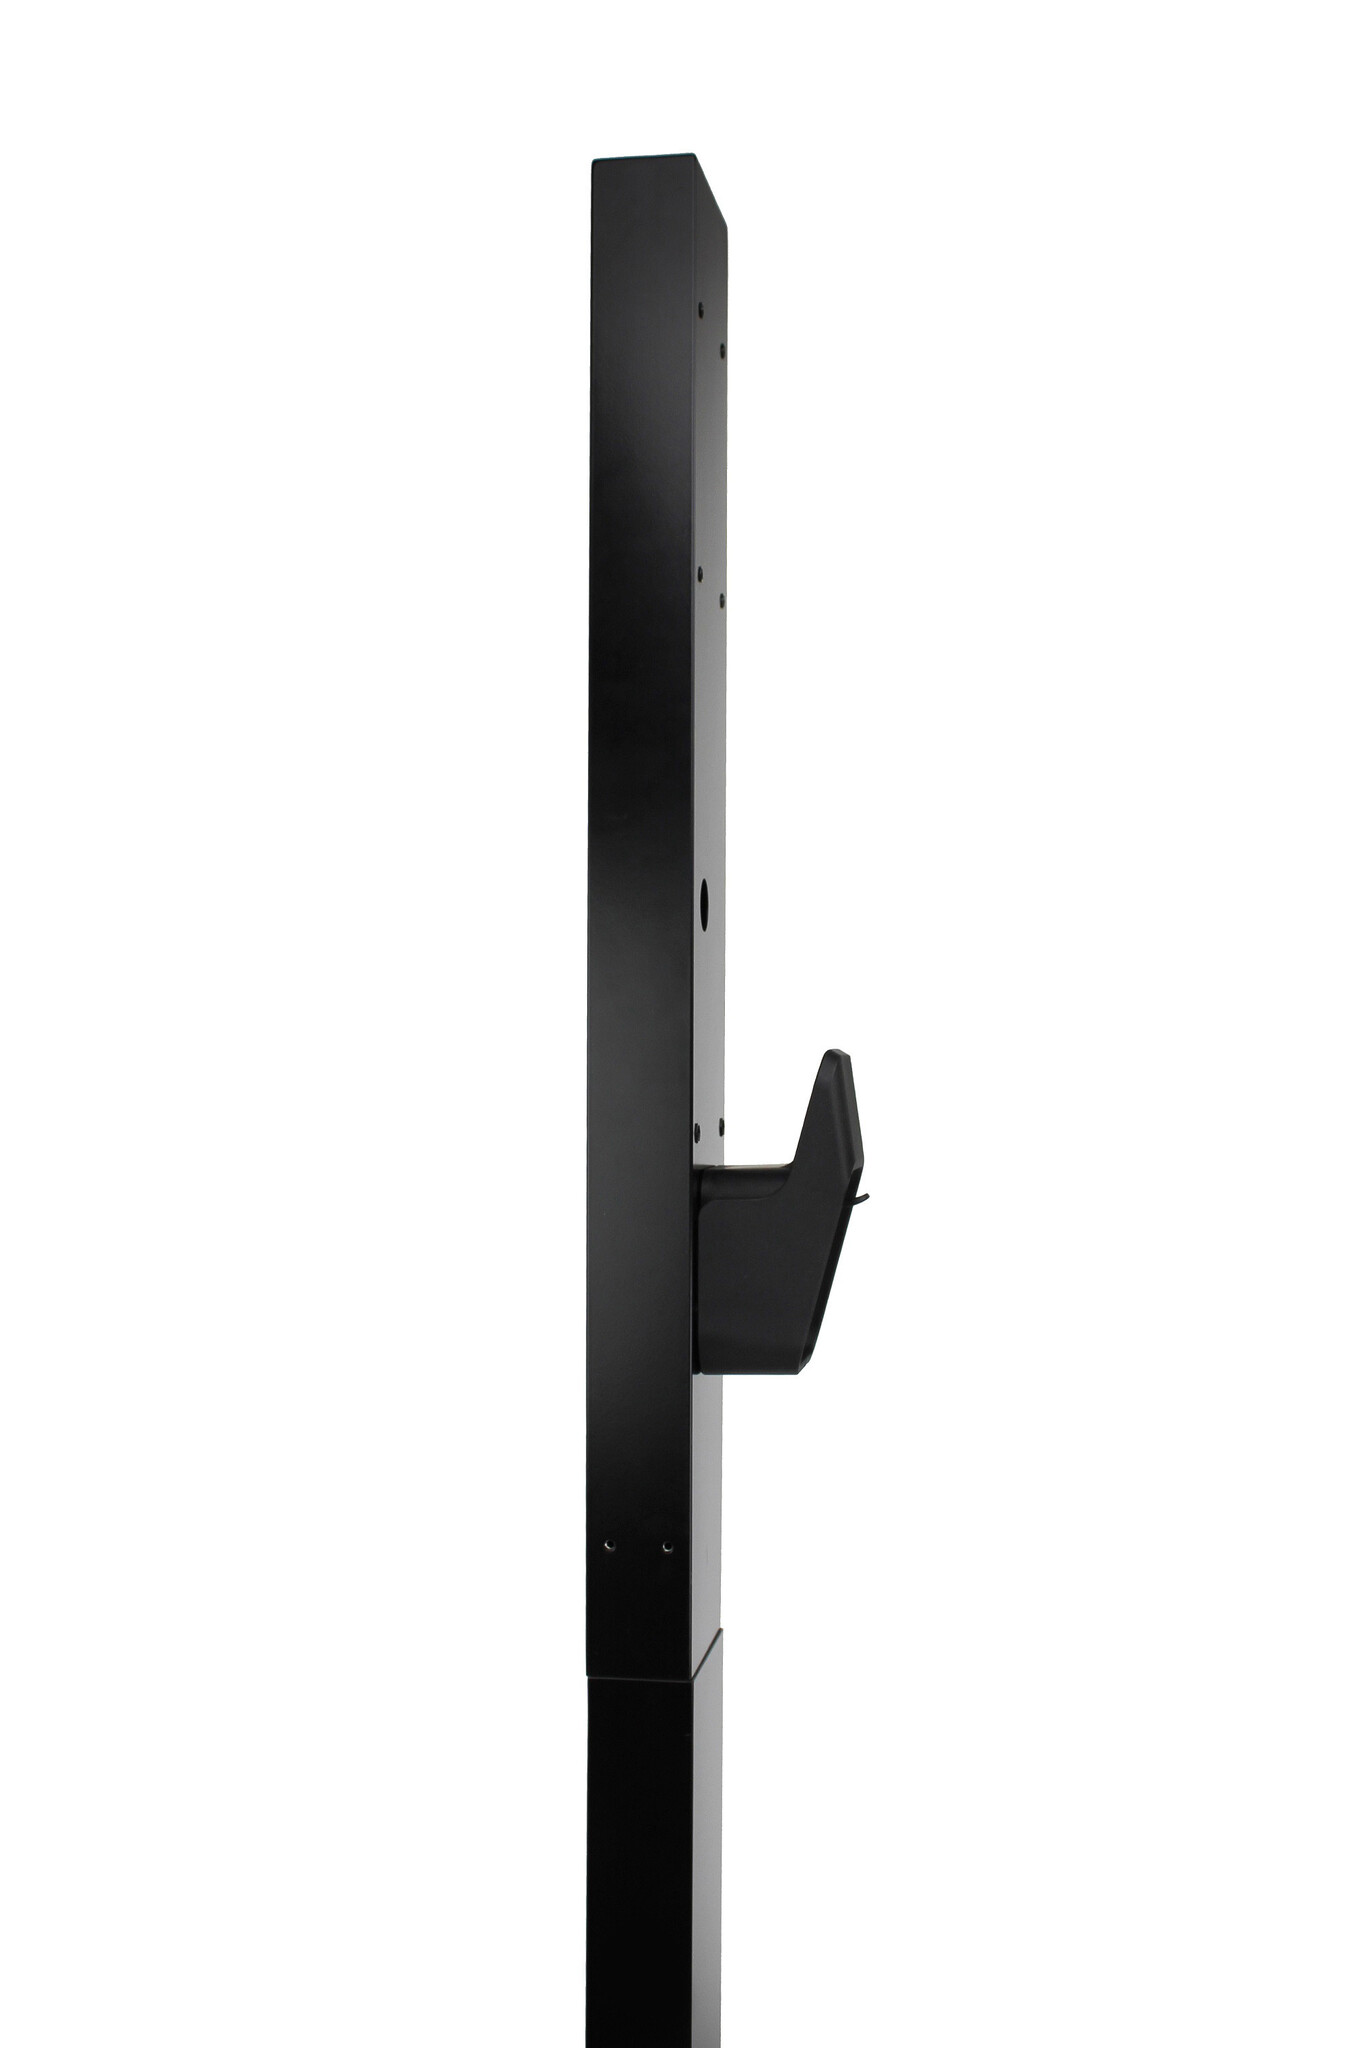 Pull up Wall Mount Chinup Bar, Weight: 5KG at Rs 650 in Jalandhar